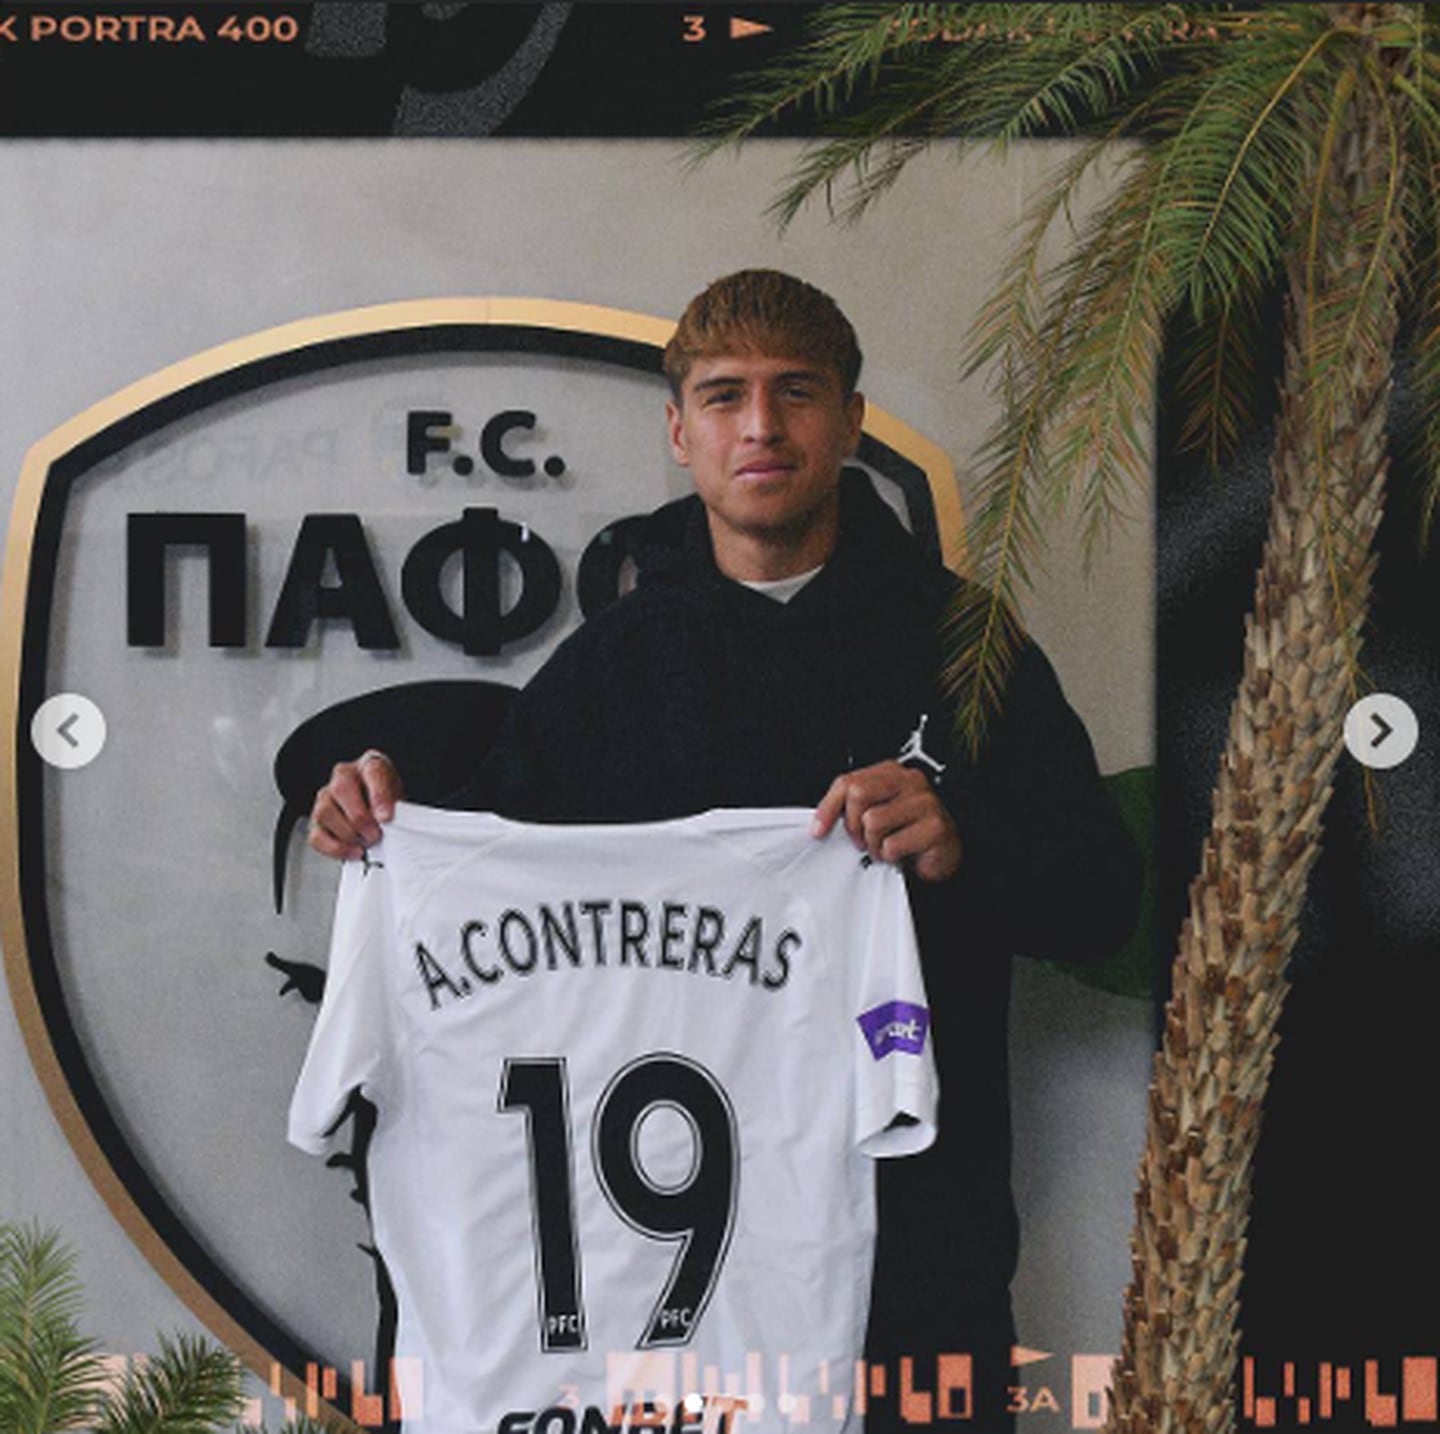 Anthony Contrera, Pafos FC, Chipre